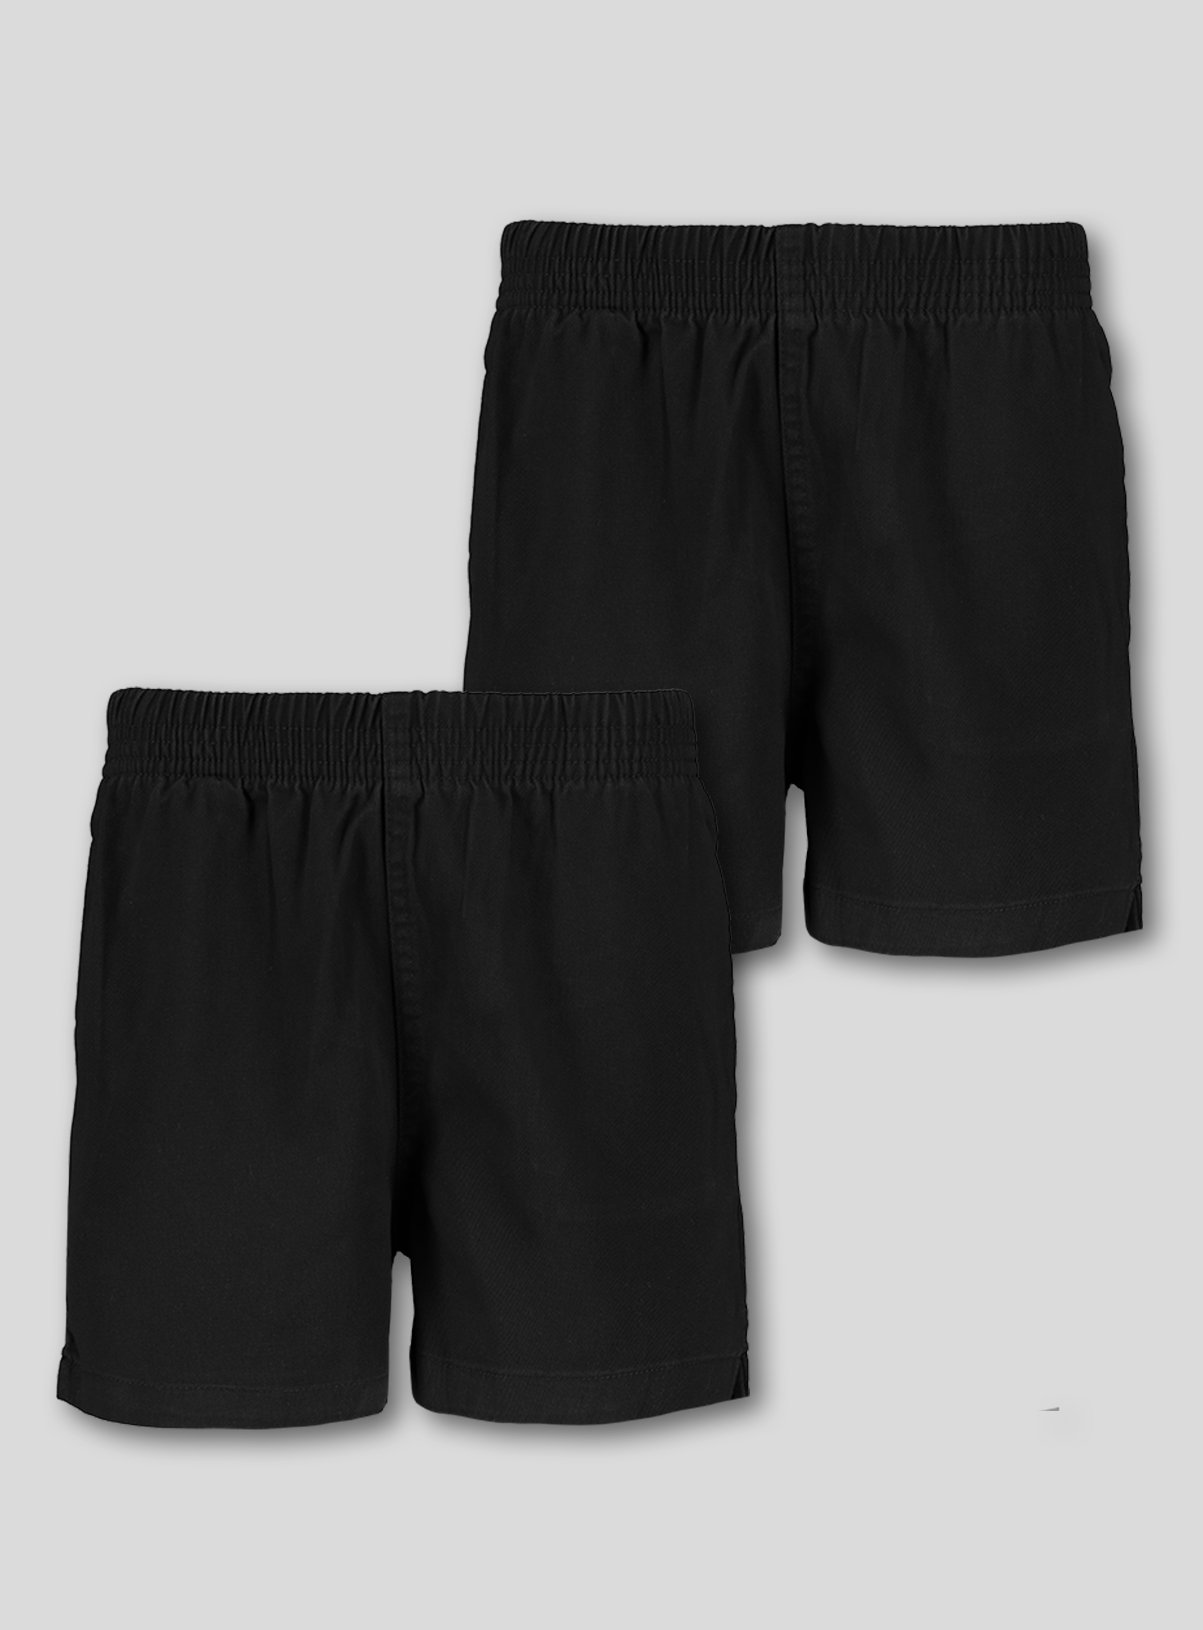 Black Woven Rugby Shorts 2 Pack Review